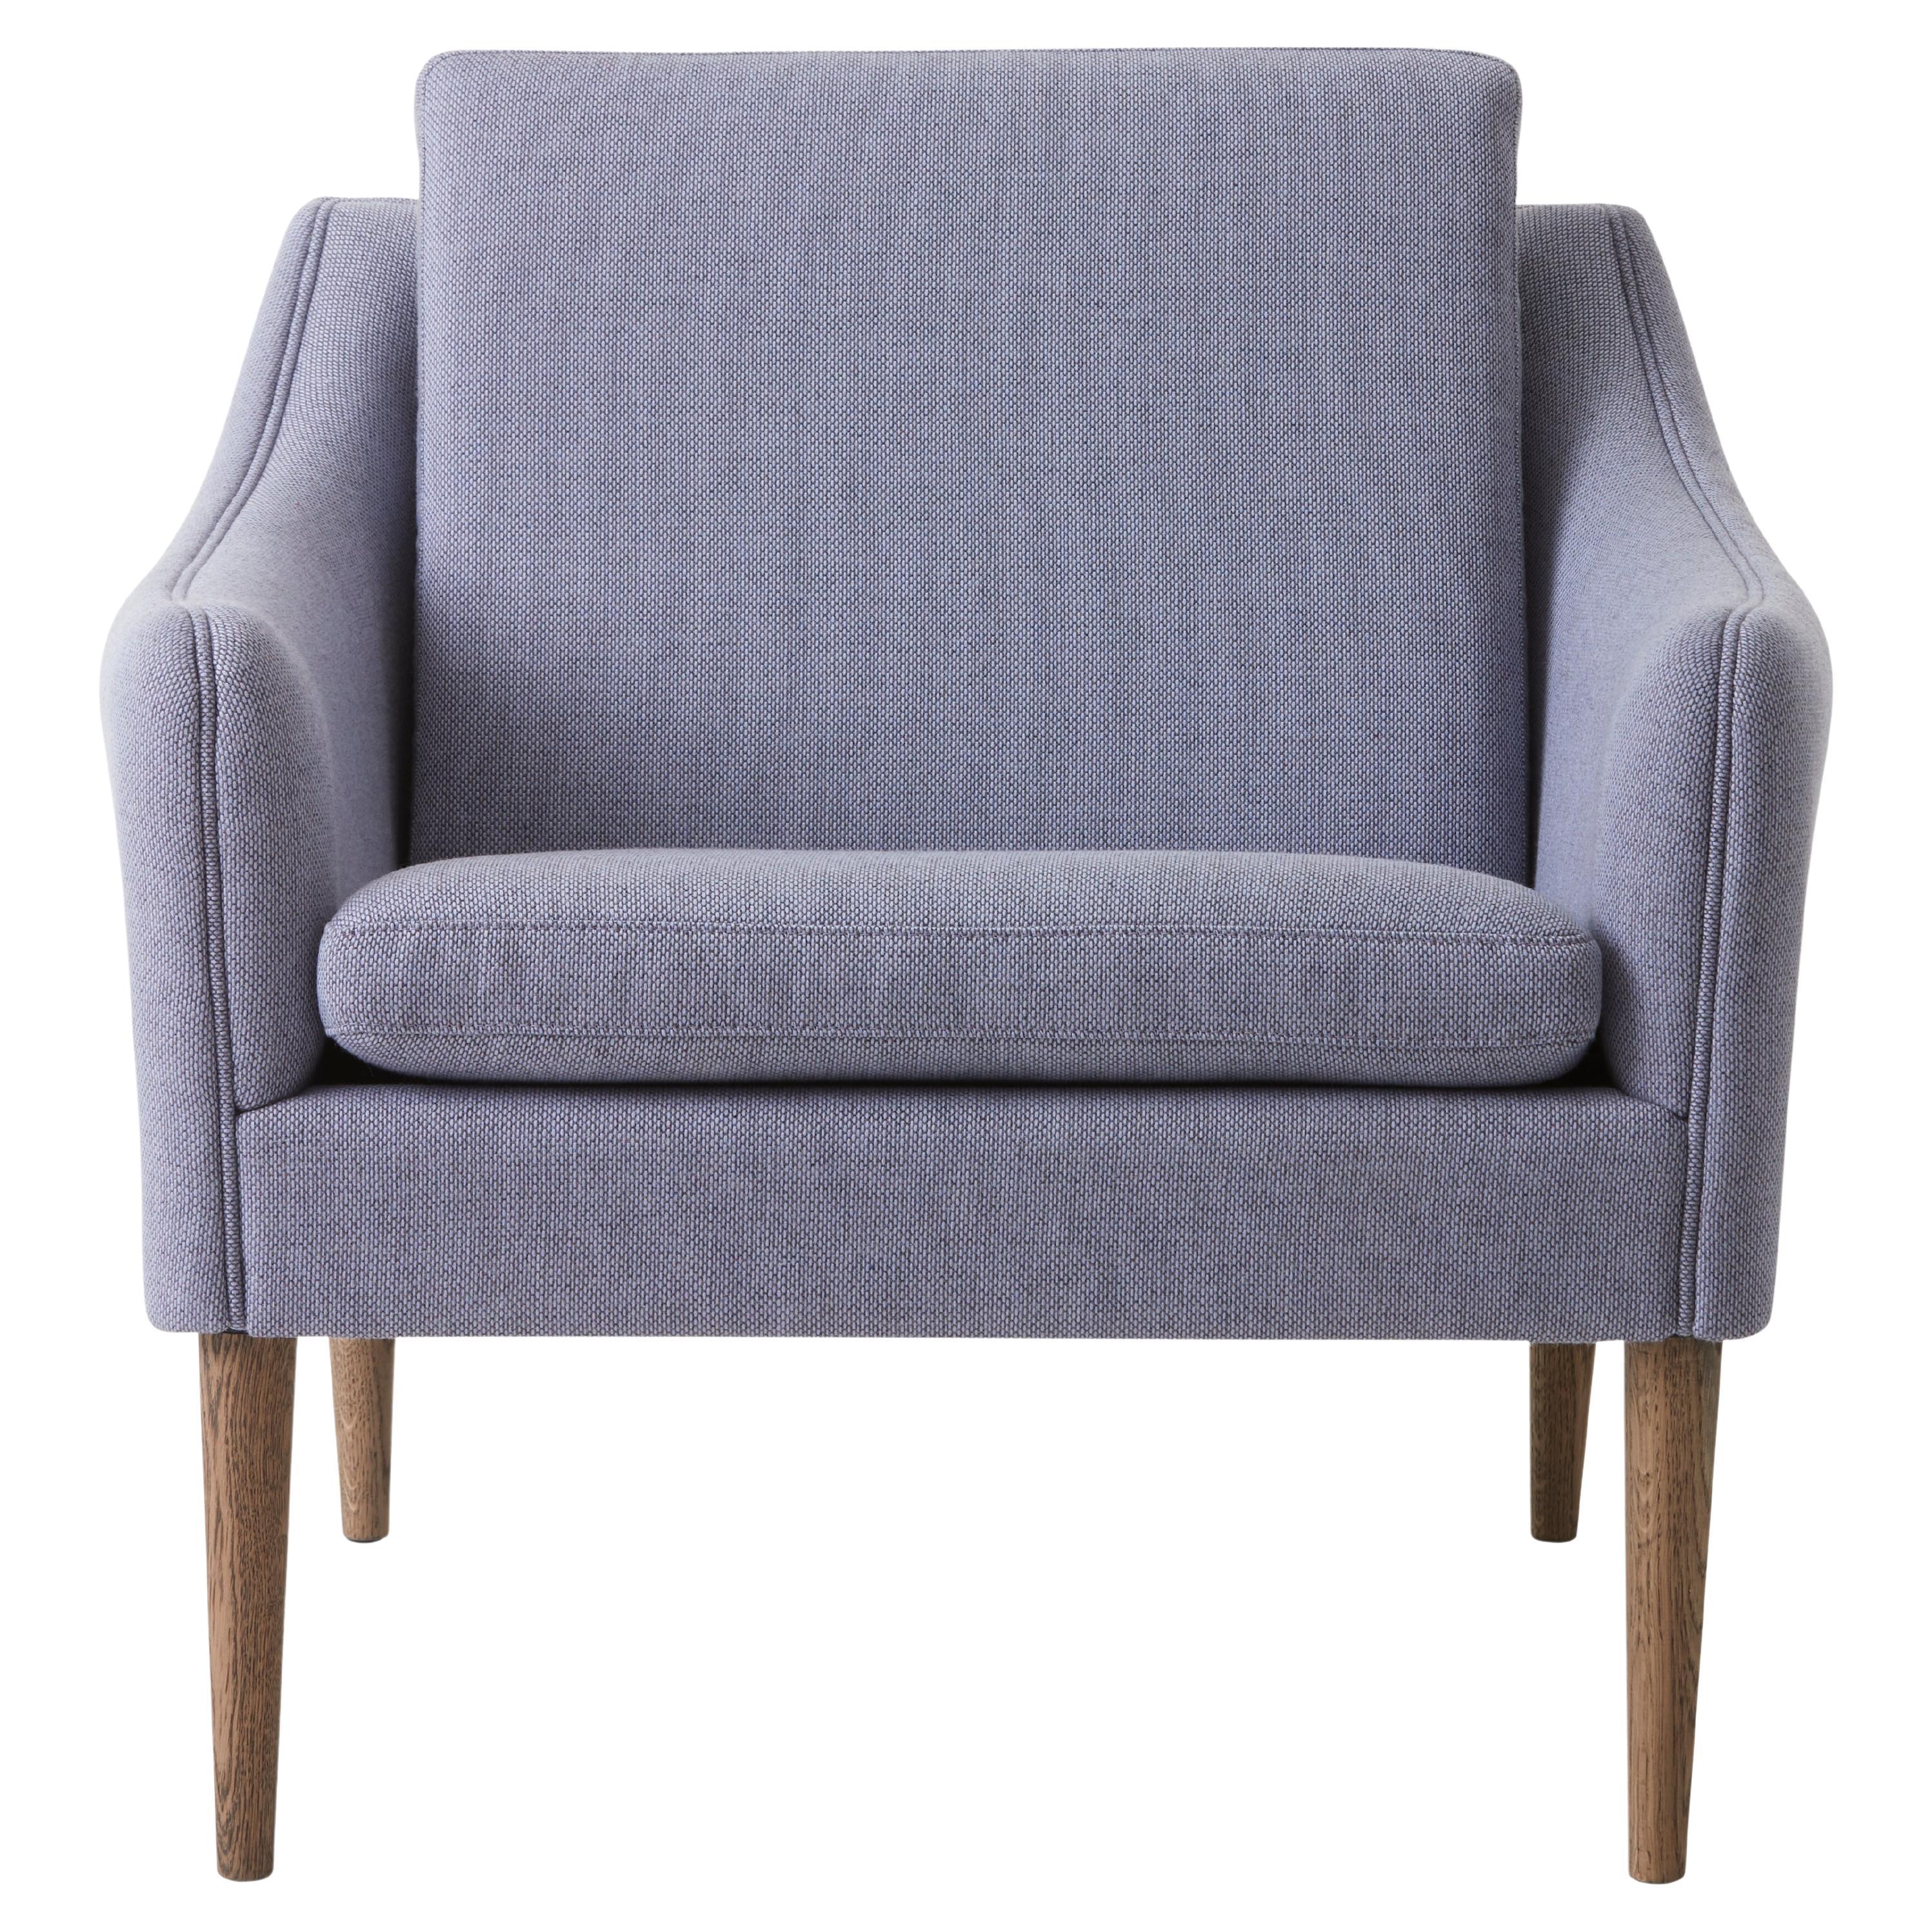 Mr. Olsen Lounge Chair Solid Smoked Oak Soft Violet by Warm Nordic